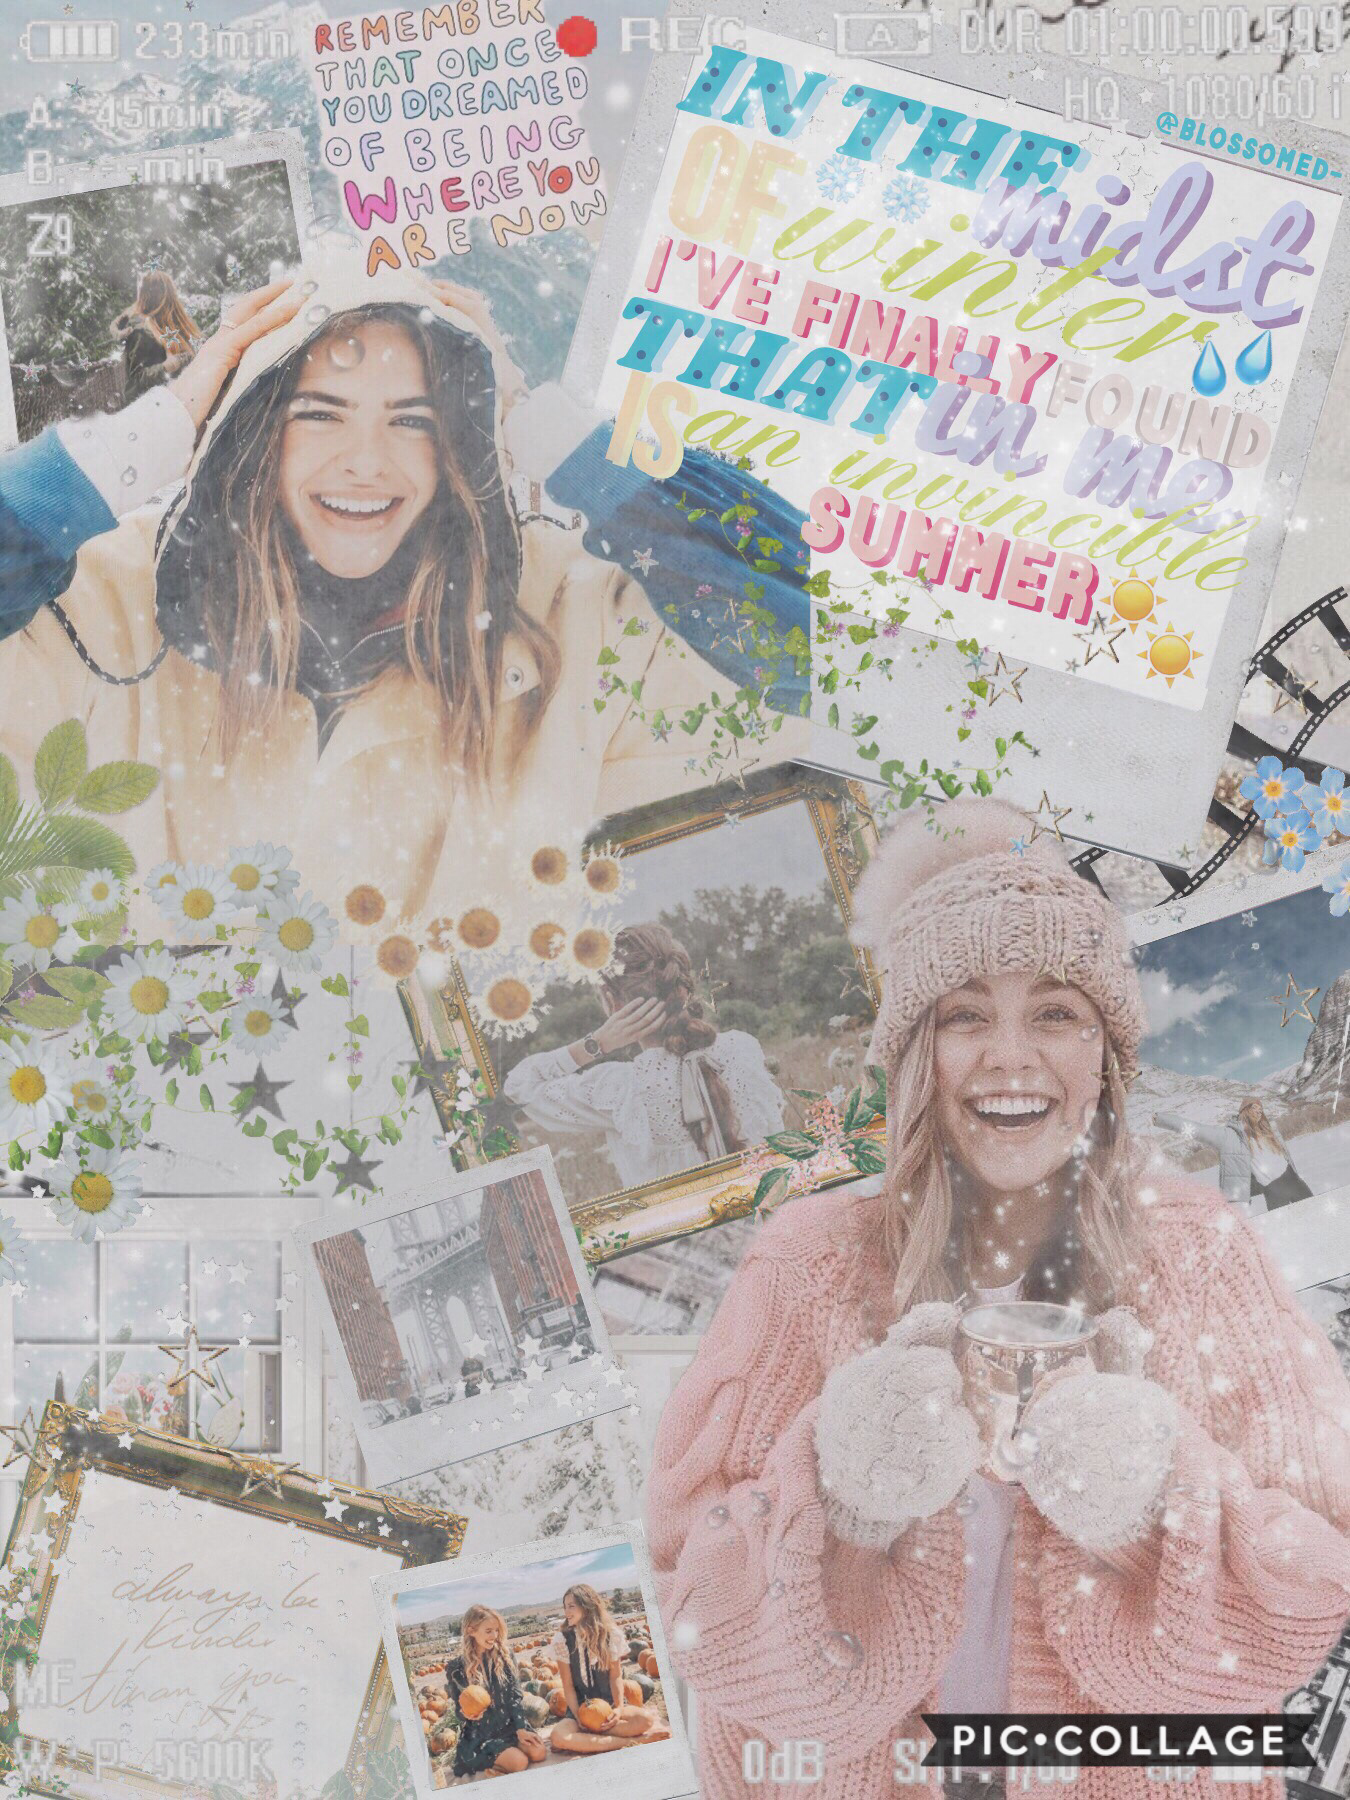 hi everyone! 💓🍡 eek almost 5 hundred! click here<< 
here’s a little winter themed collage for y’all, feeling it atm🥶. ah how is everyone? I need to start getting inspo for captions ❄️I’m so glad it’s a long weekend and almost holidays, 🥰 I need a break. ☁